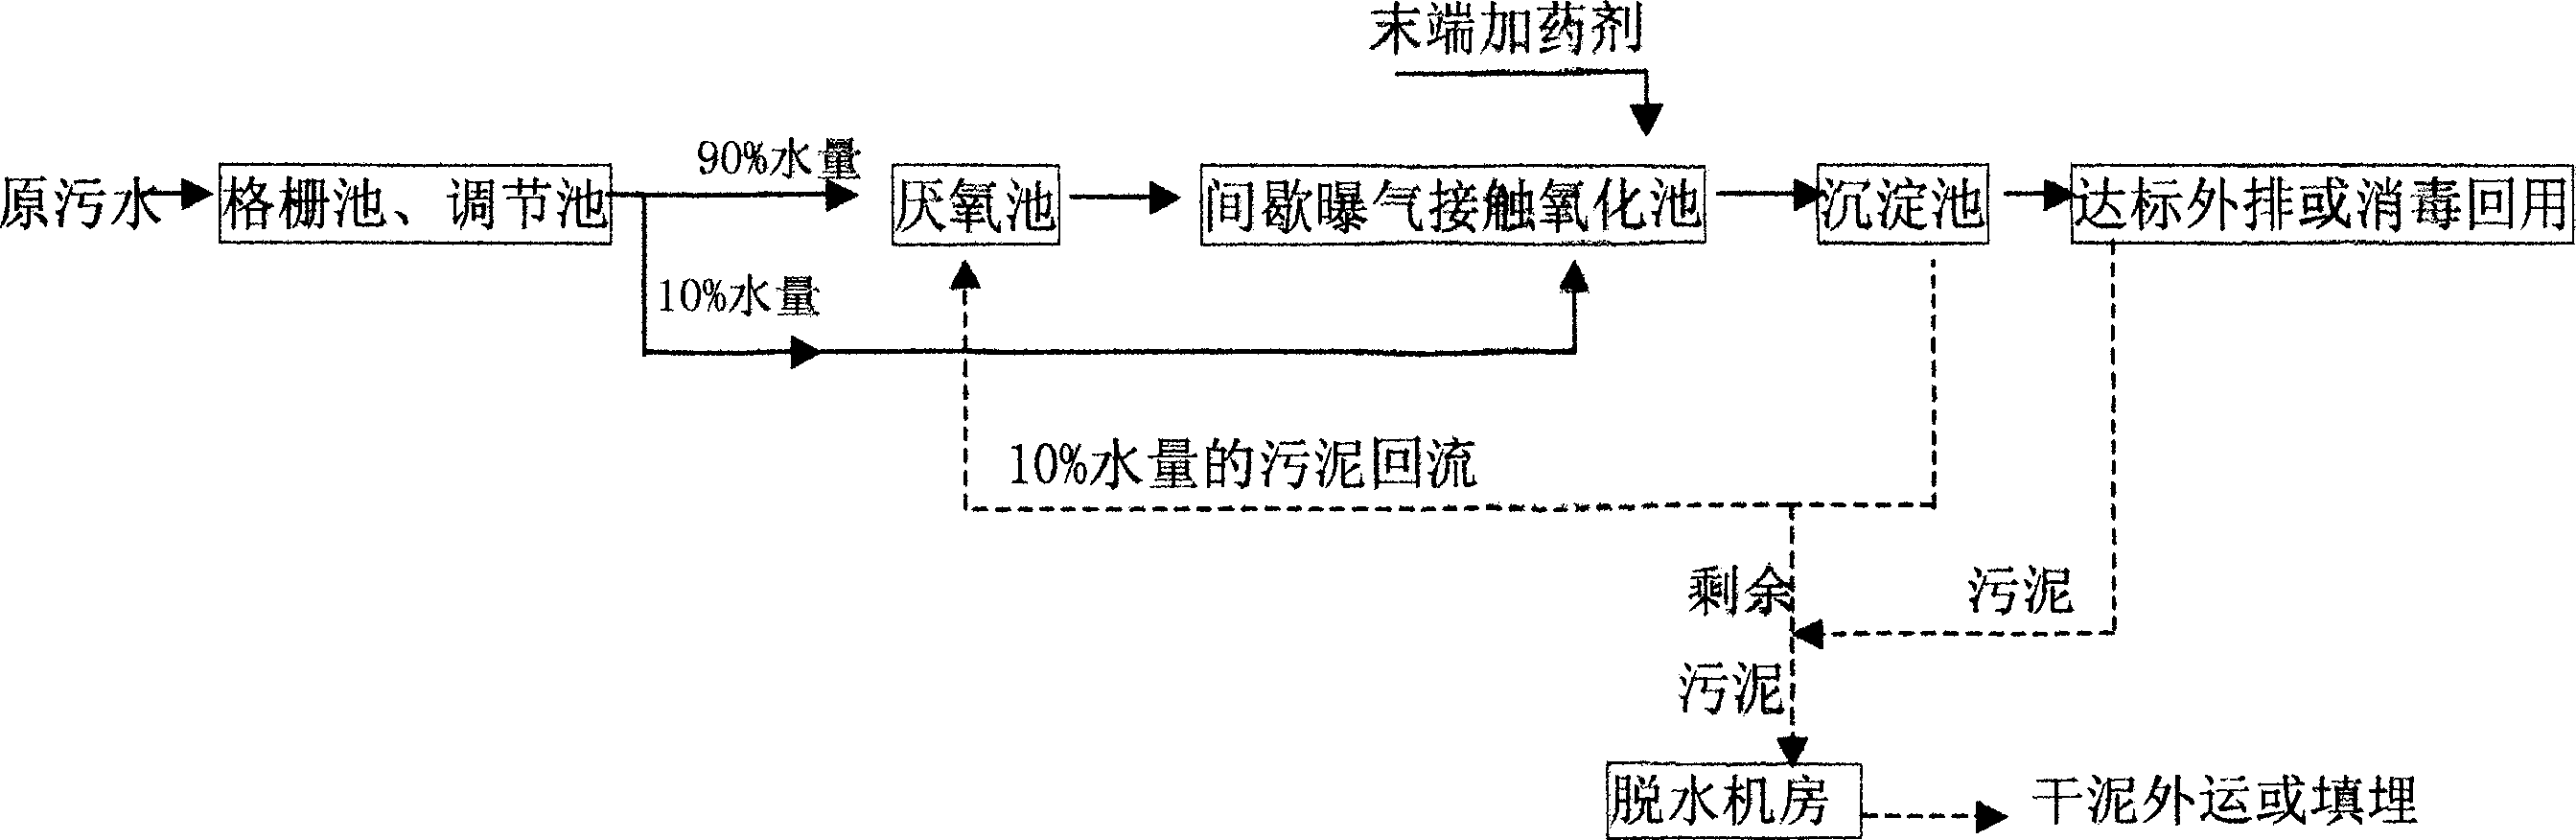 Domestic sewage treatment method by intermittent aeration contact oxidation process